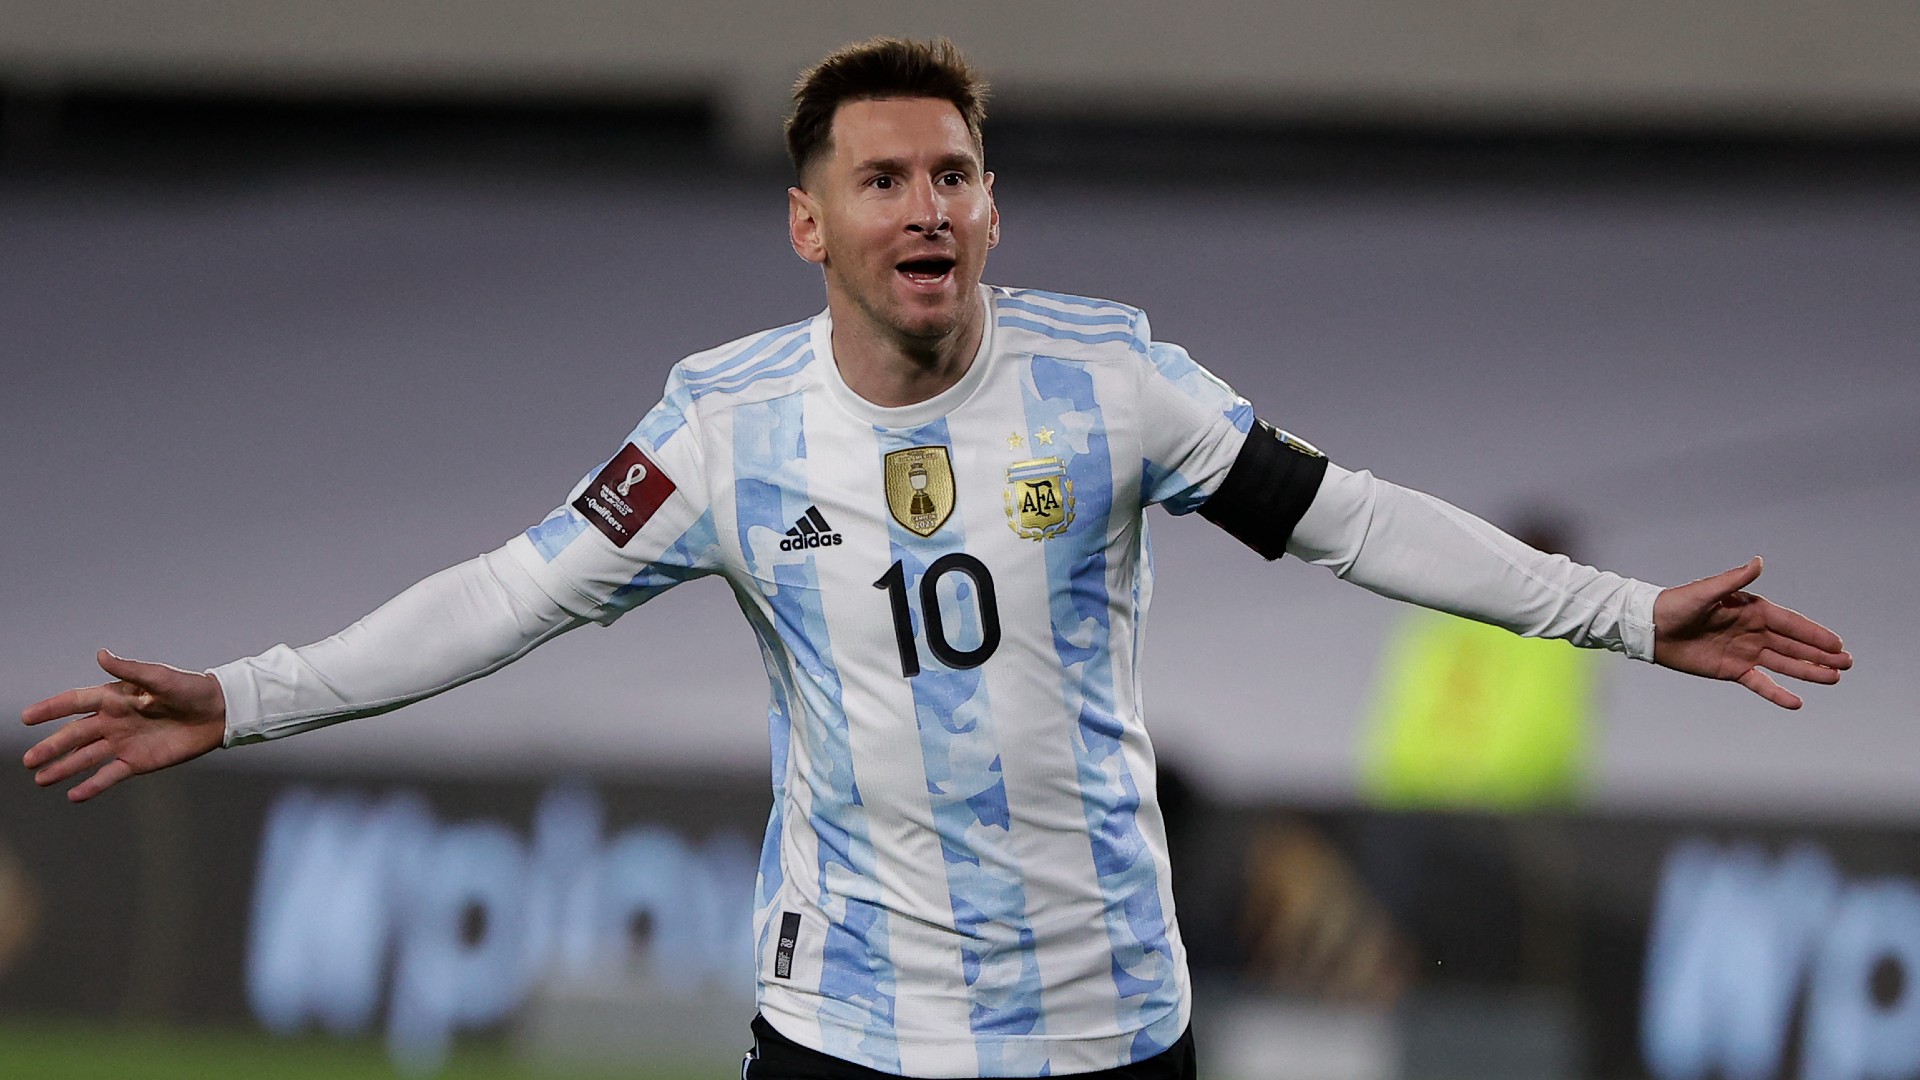 Argentina vs Uruguay: TV channel, live stream, team news and preview